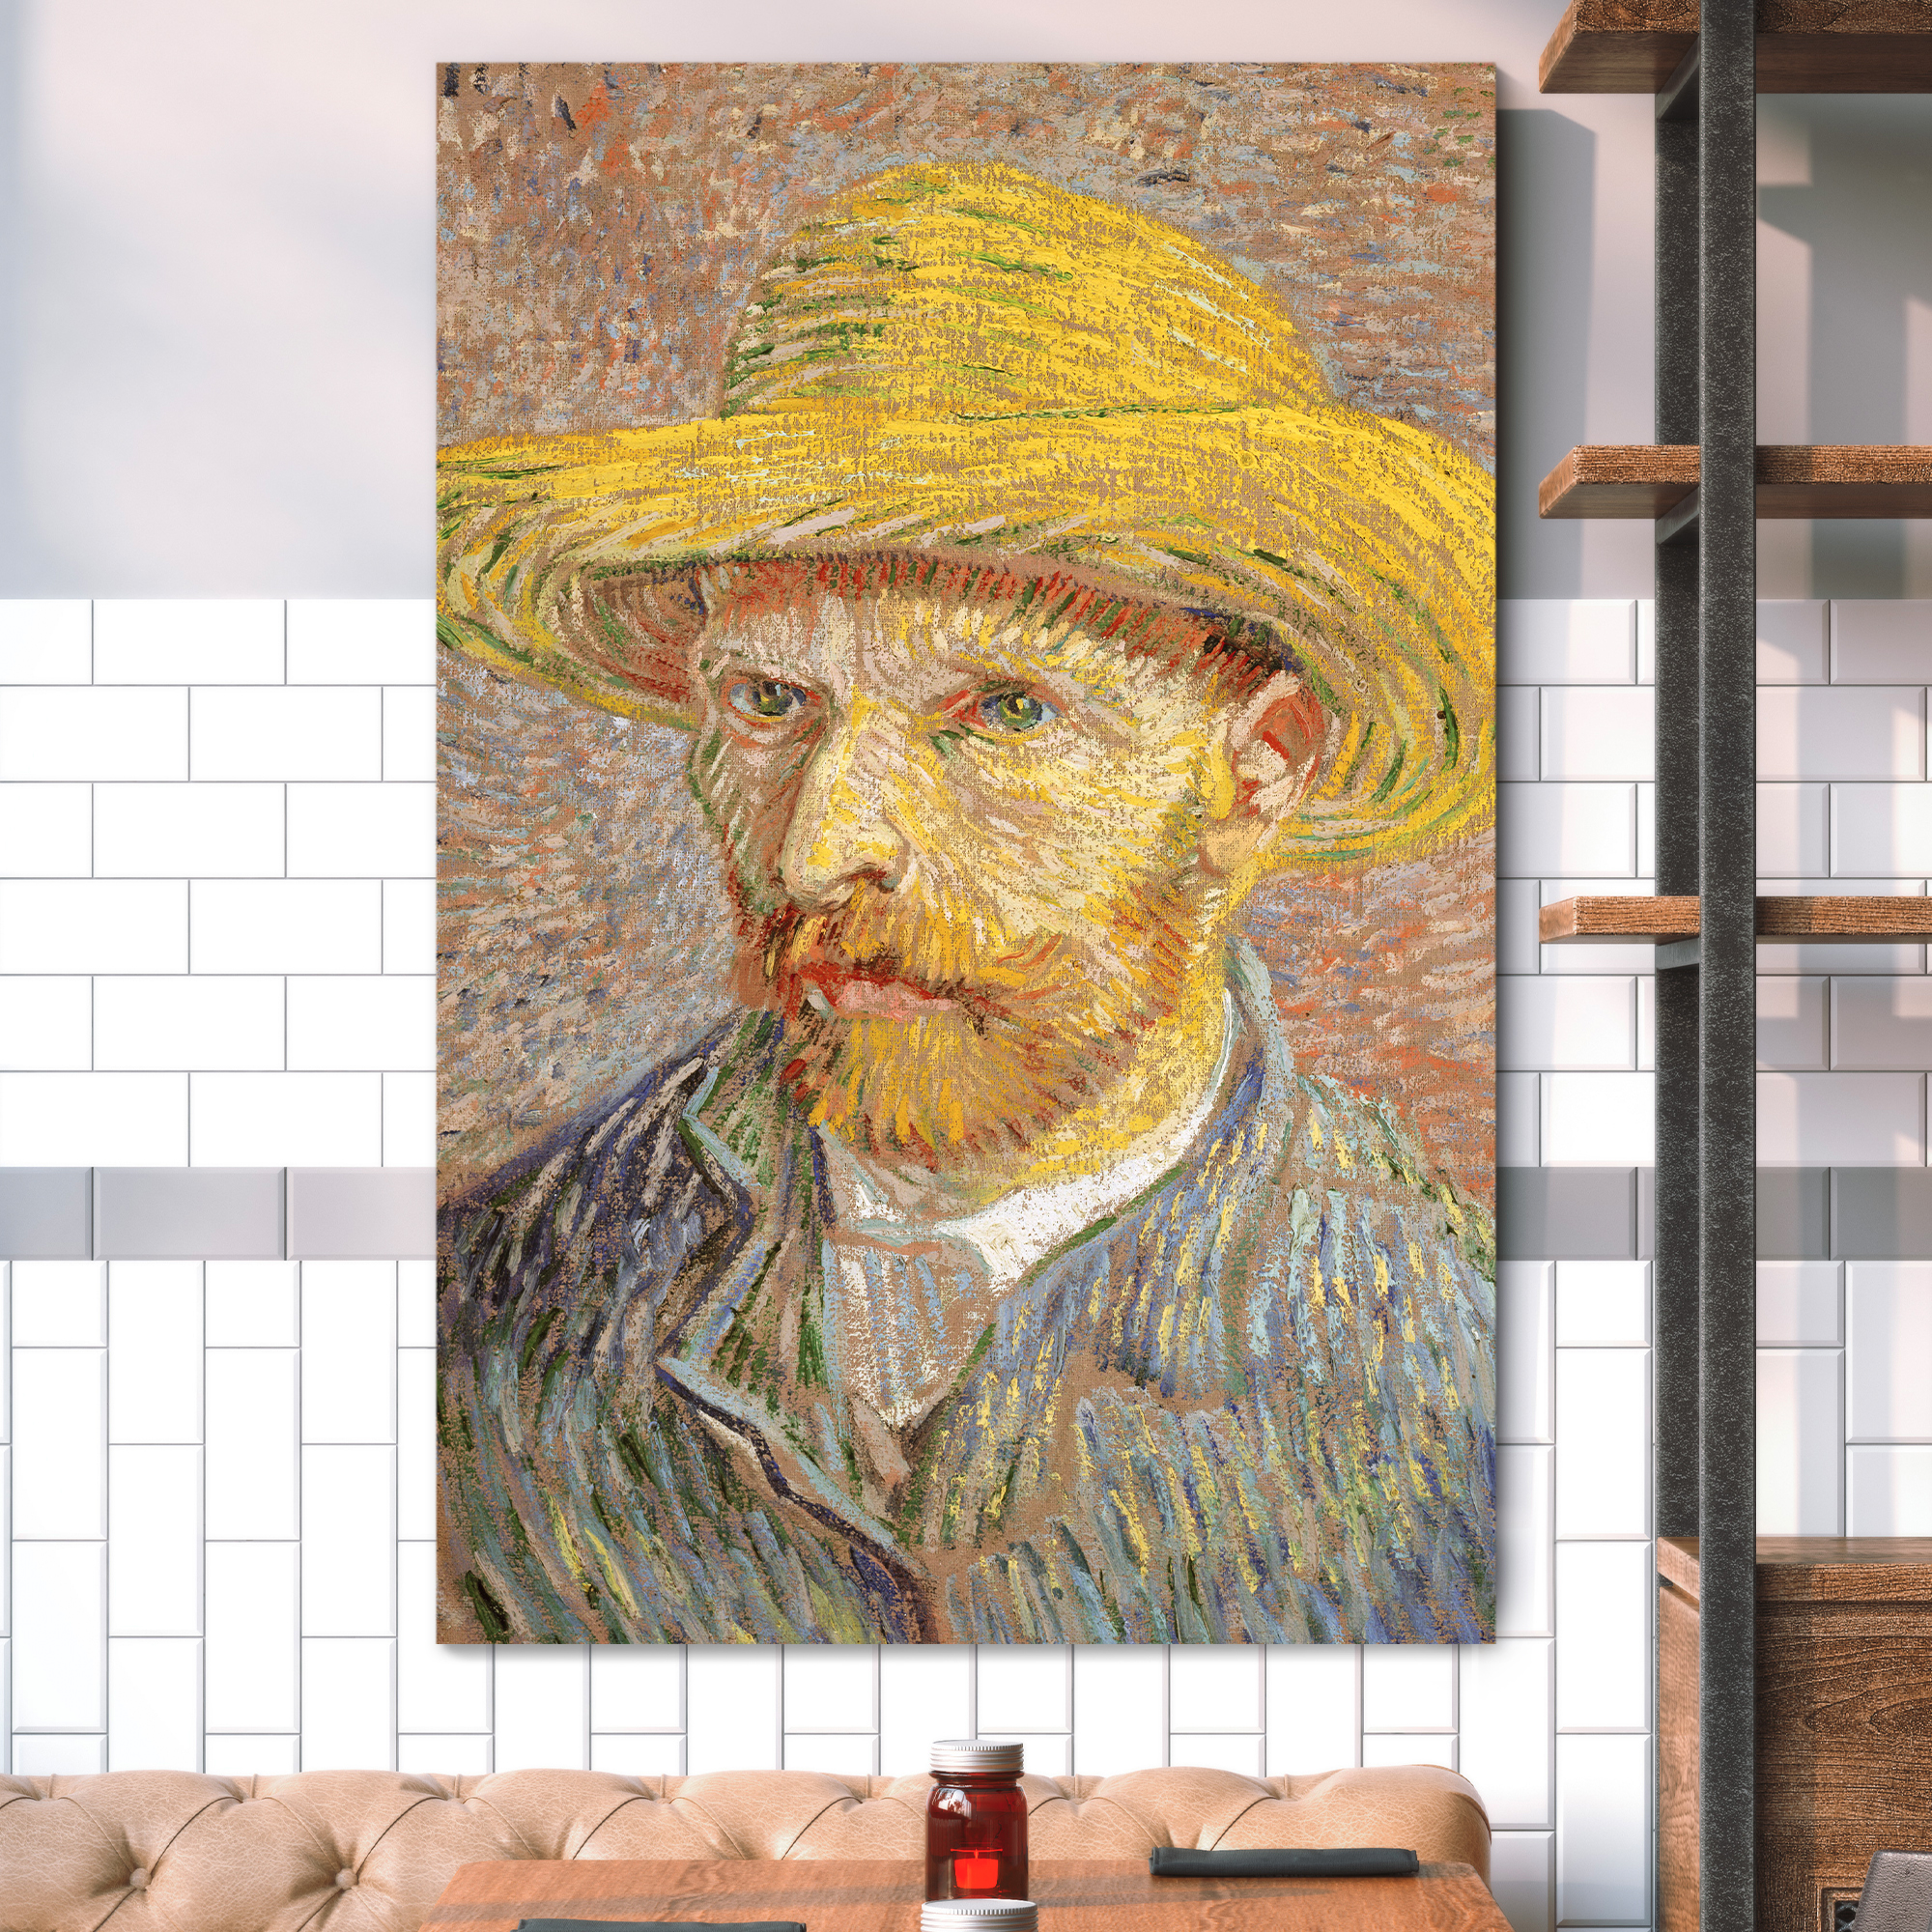 Self Portrait with a Straw Hat by Vincent Van Gogh - Oil Painting Reproduction on Canvas Prints Wall Art, Ready to Hang - 24